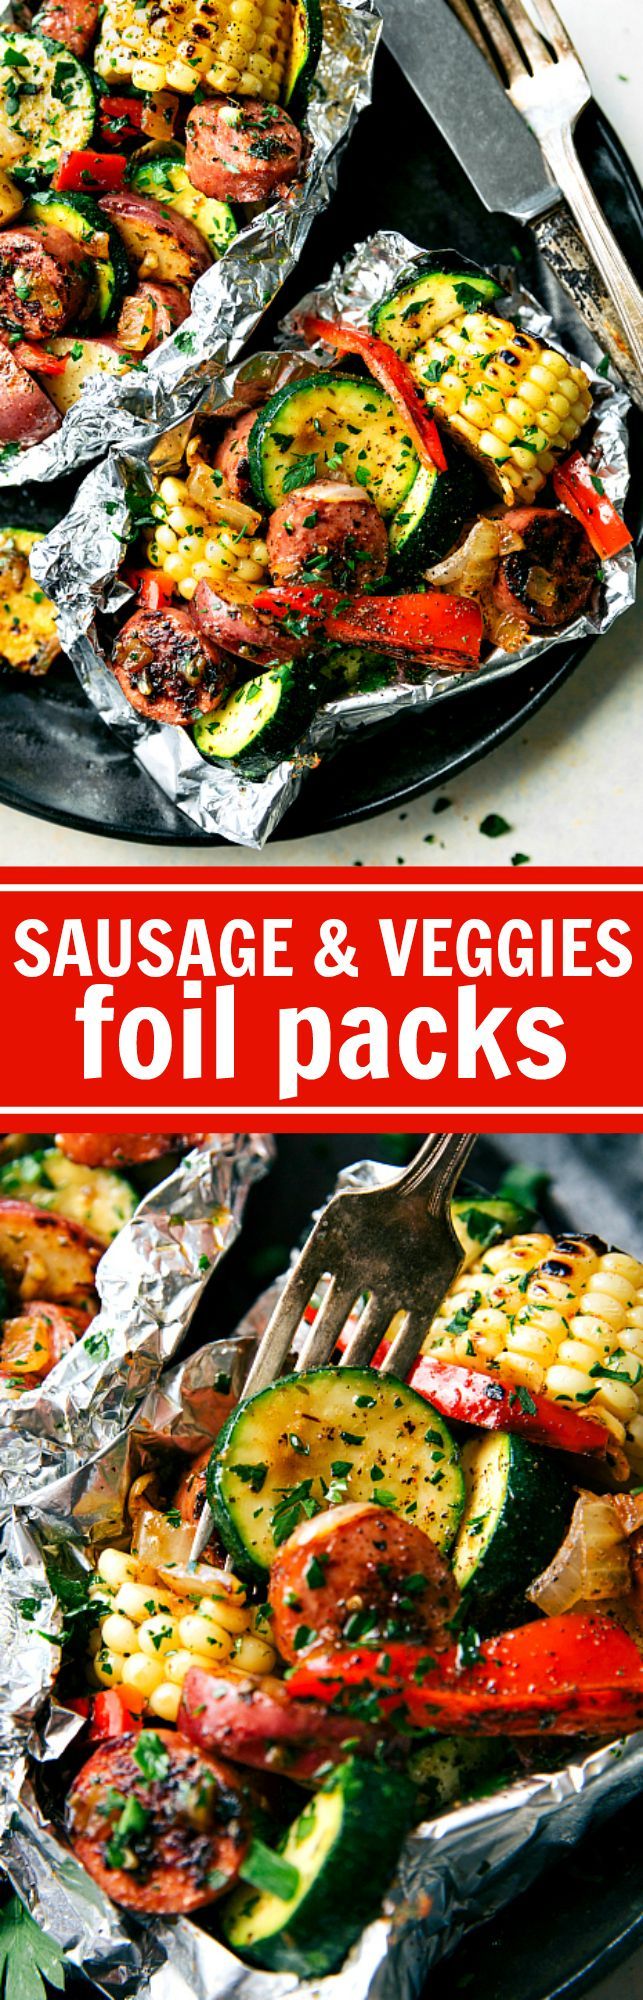 These delicious and easy tin foil packets are so quick to assemble! They are packed with sausage, tons of veggies, and the very